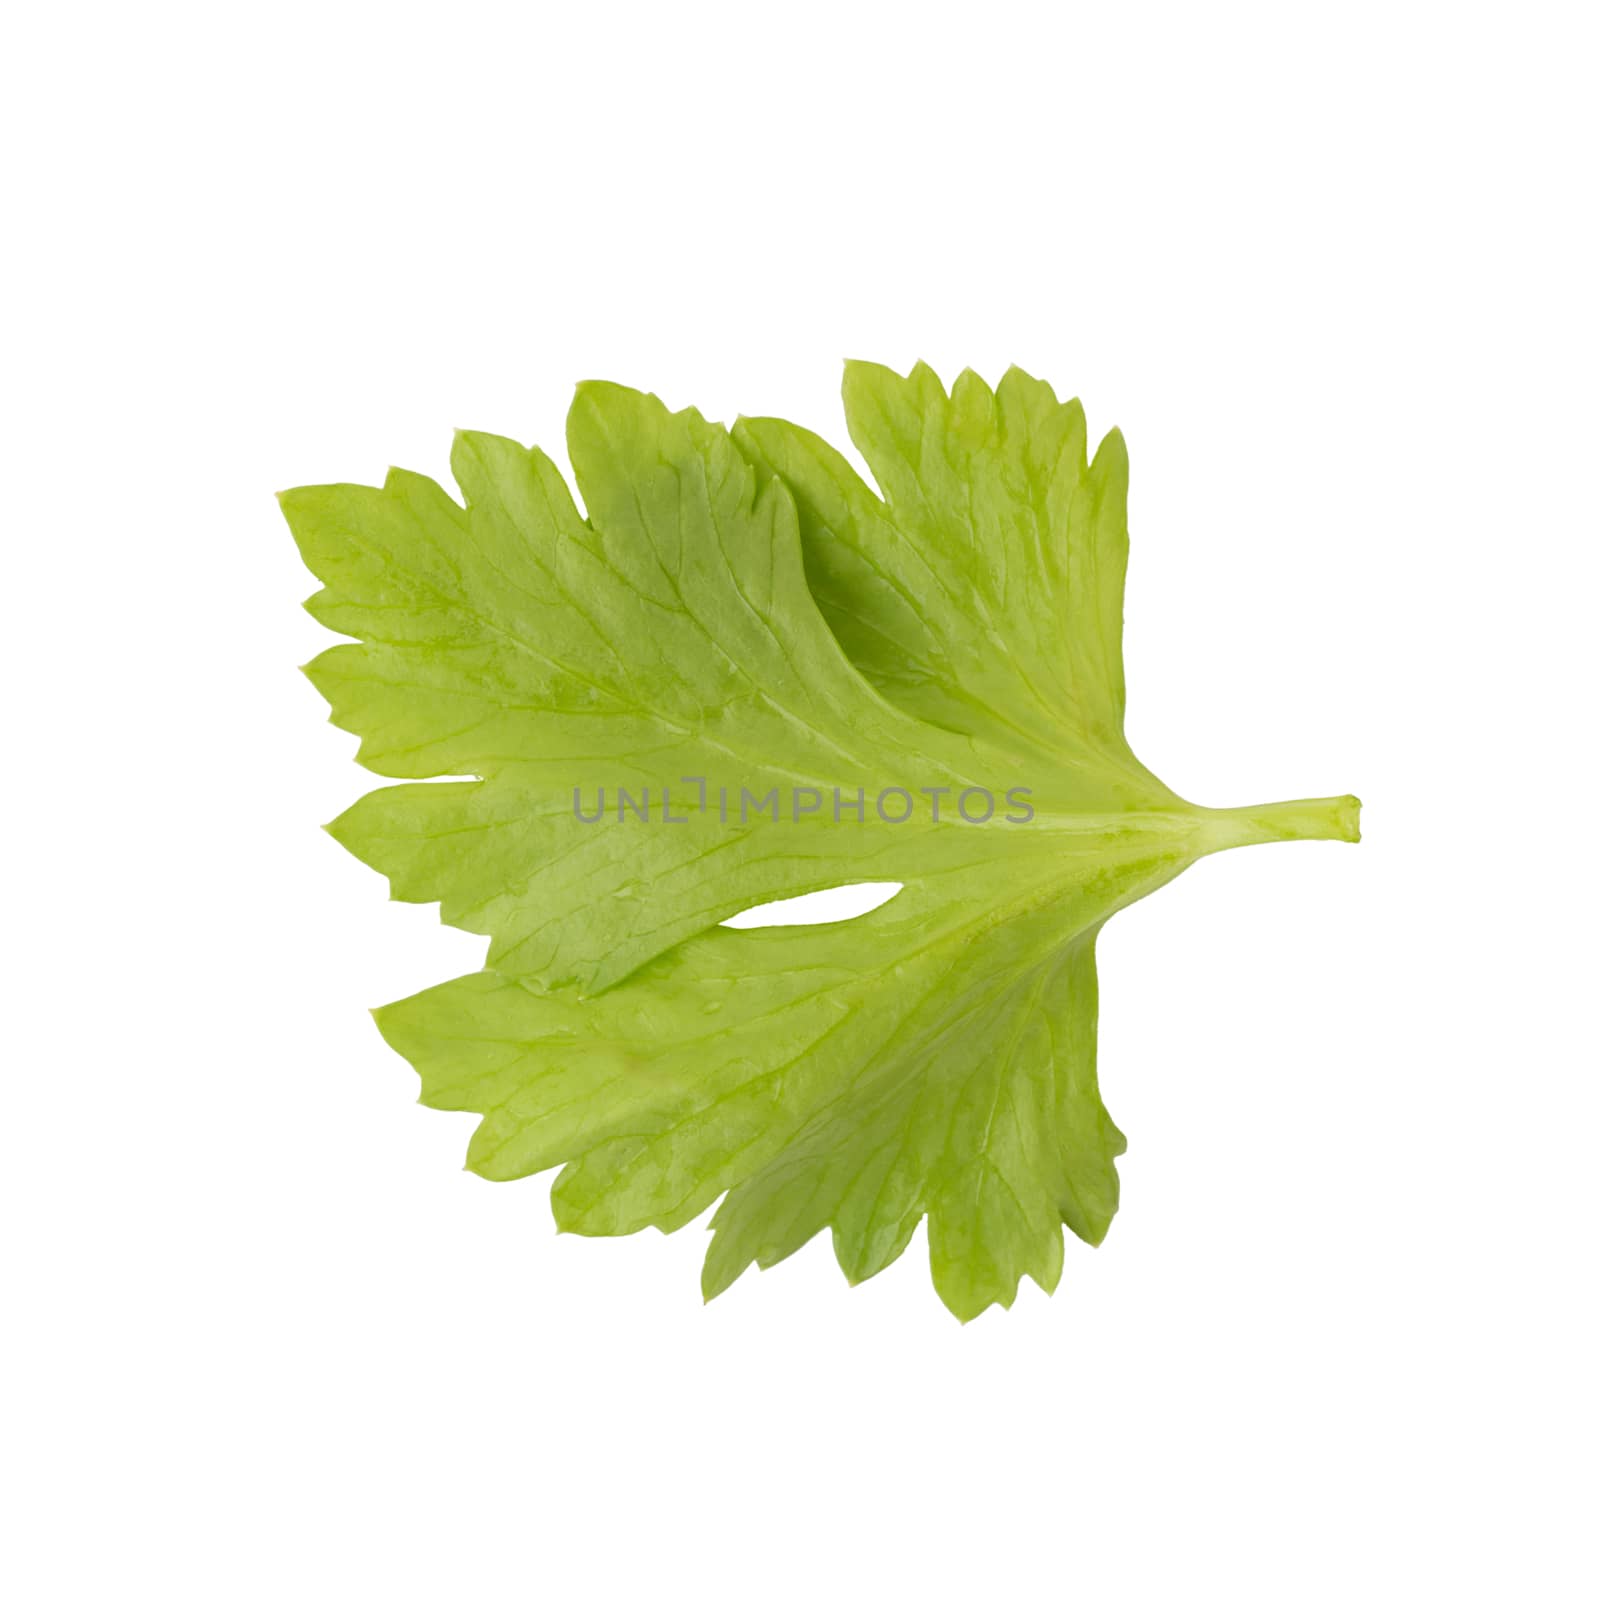 Celery or parsley leaf isolated on white background. Top view.